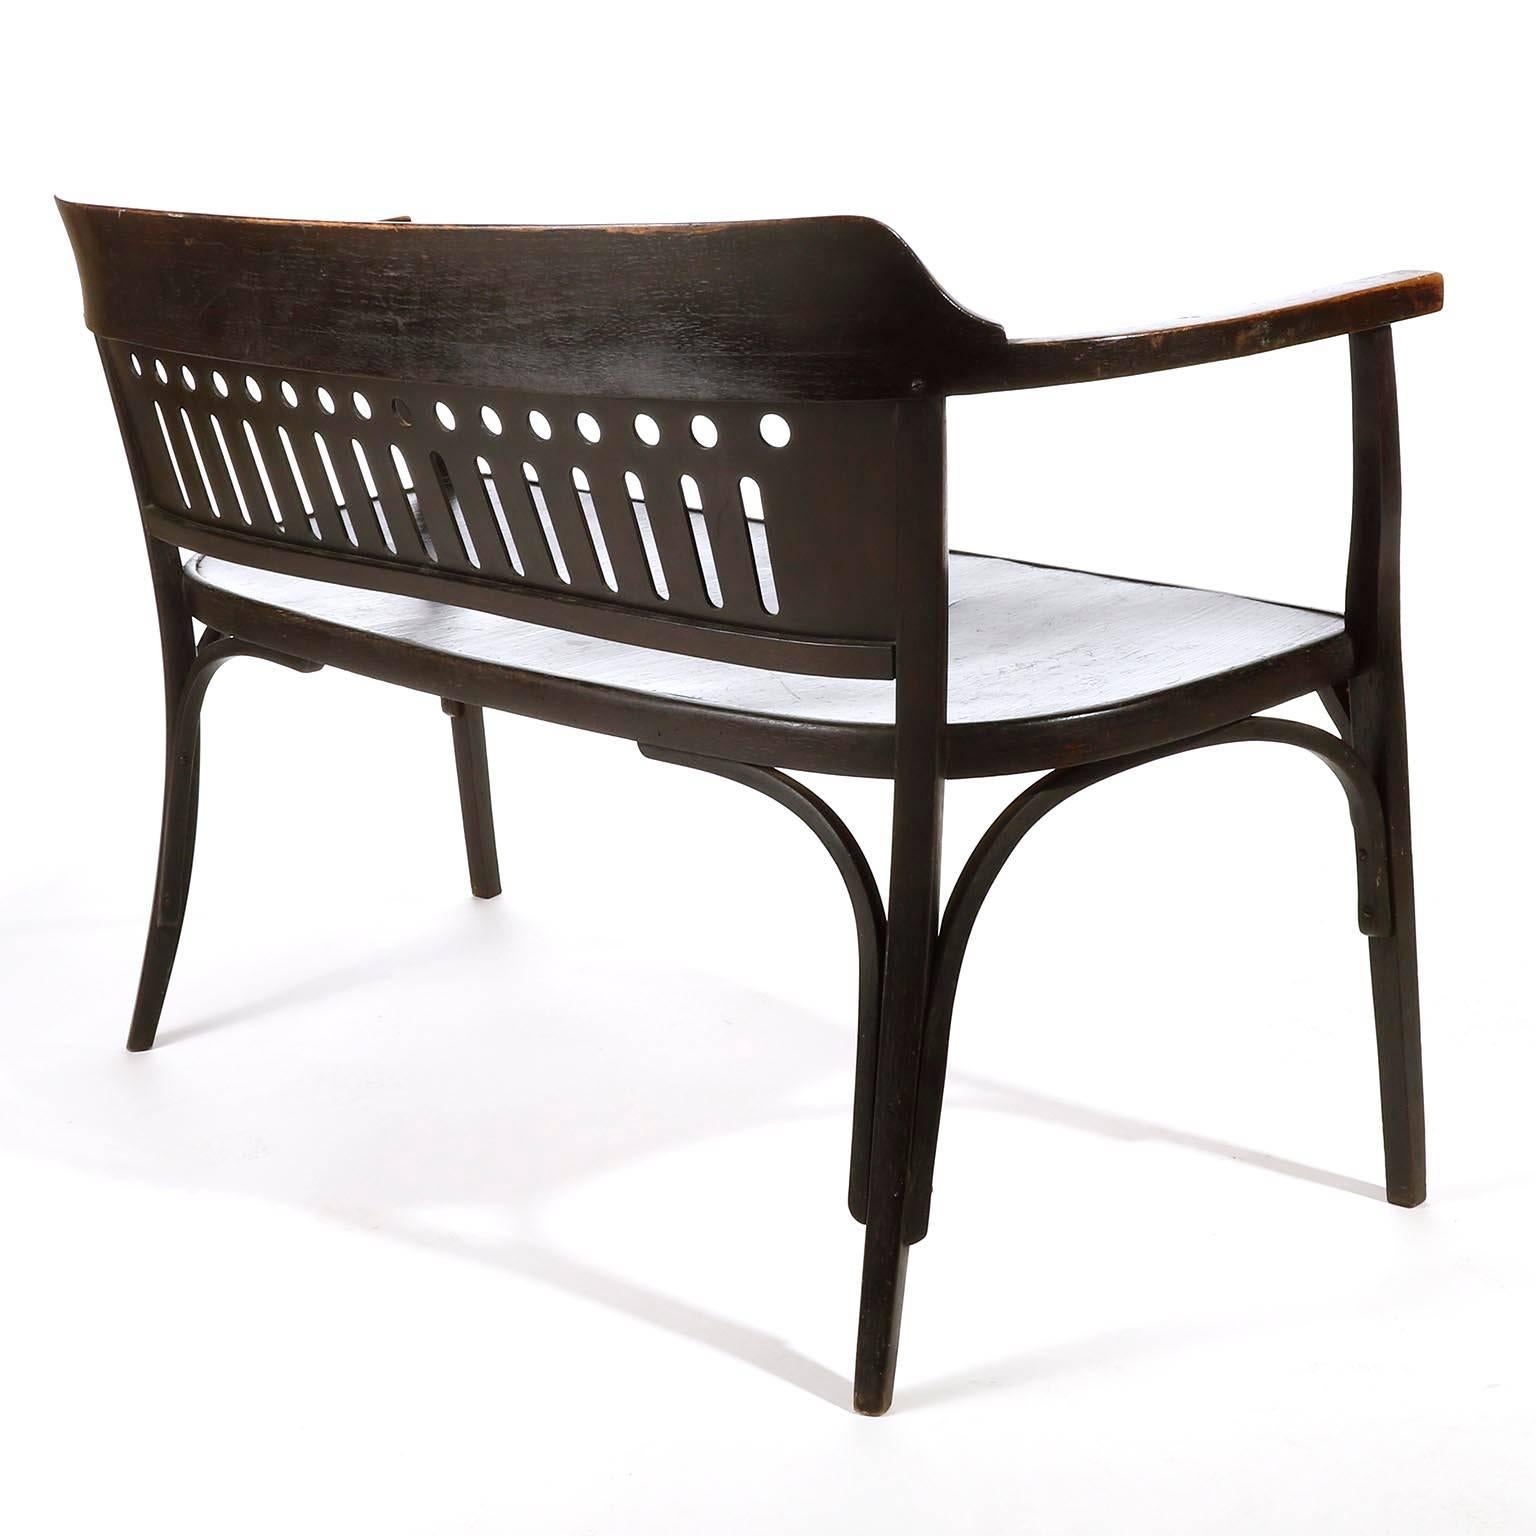 Otto Wagner Settee Bench Bentwood, Thonet, Austria, Vienna Secession, circa 1905 For Sale 3